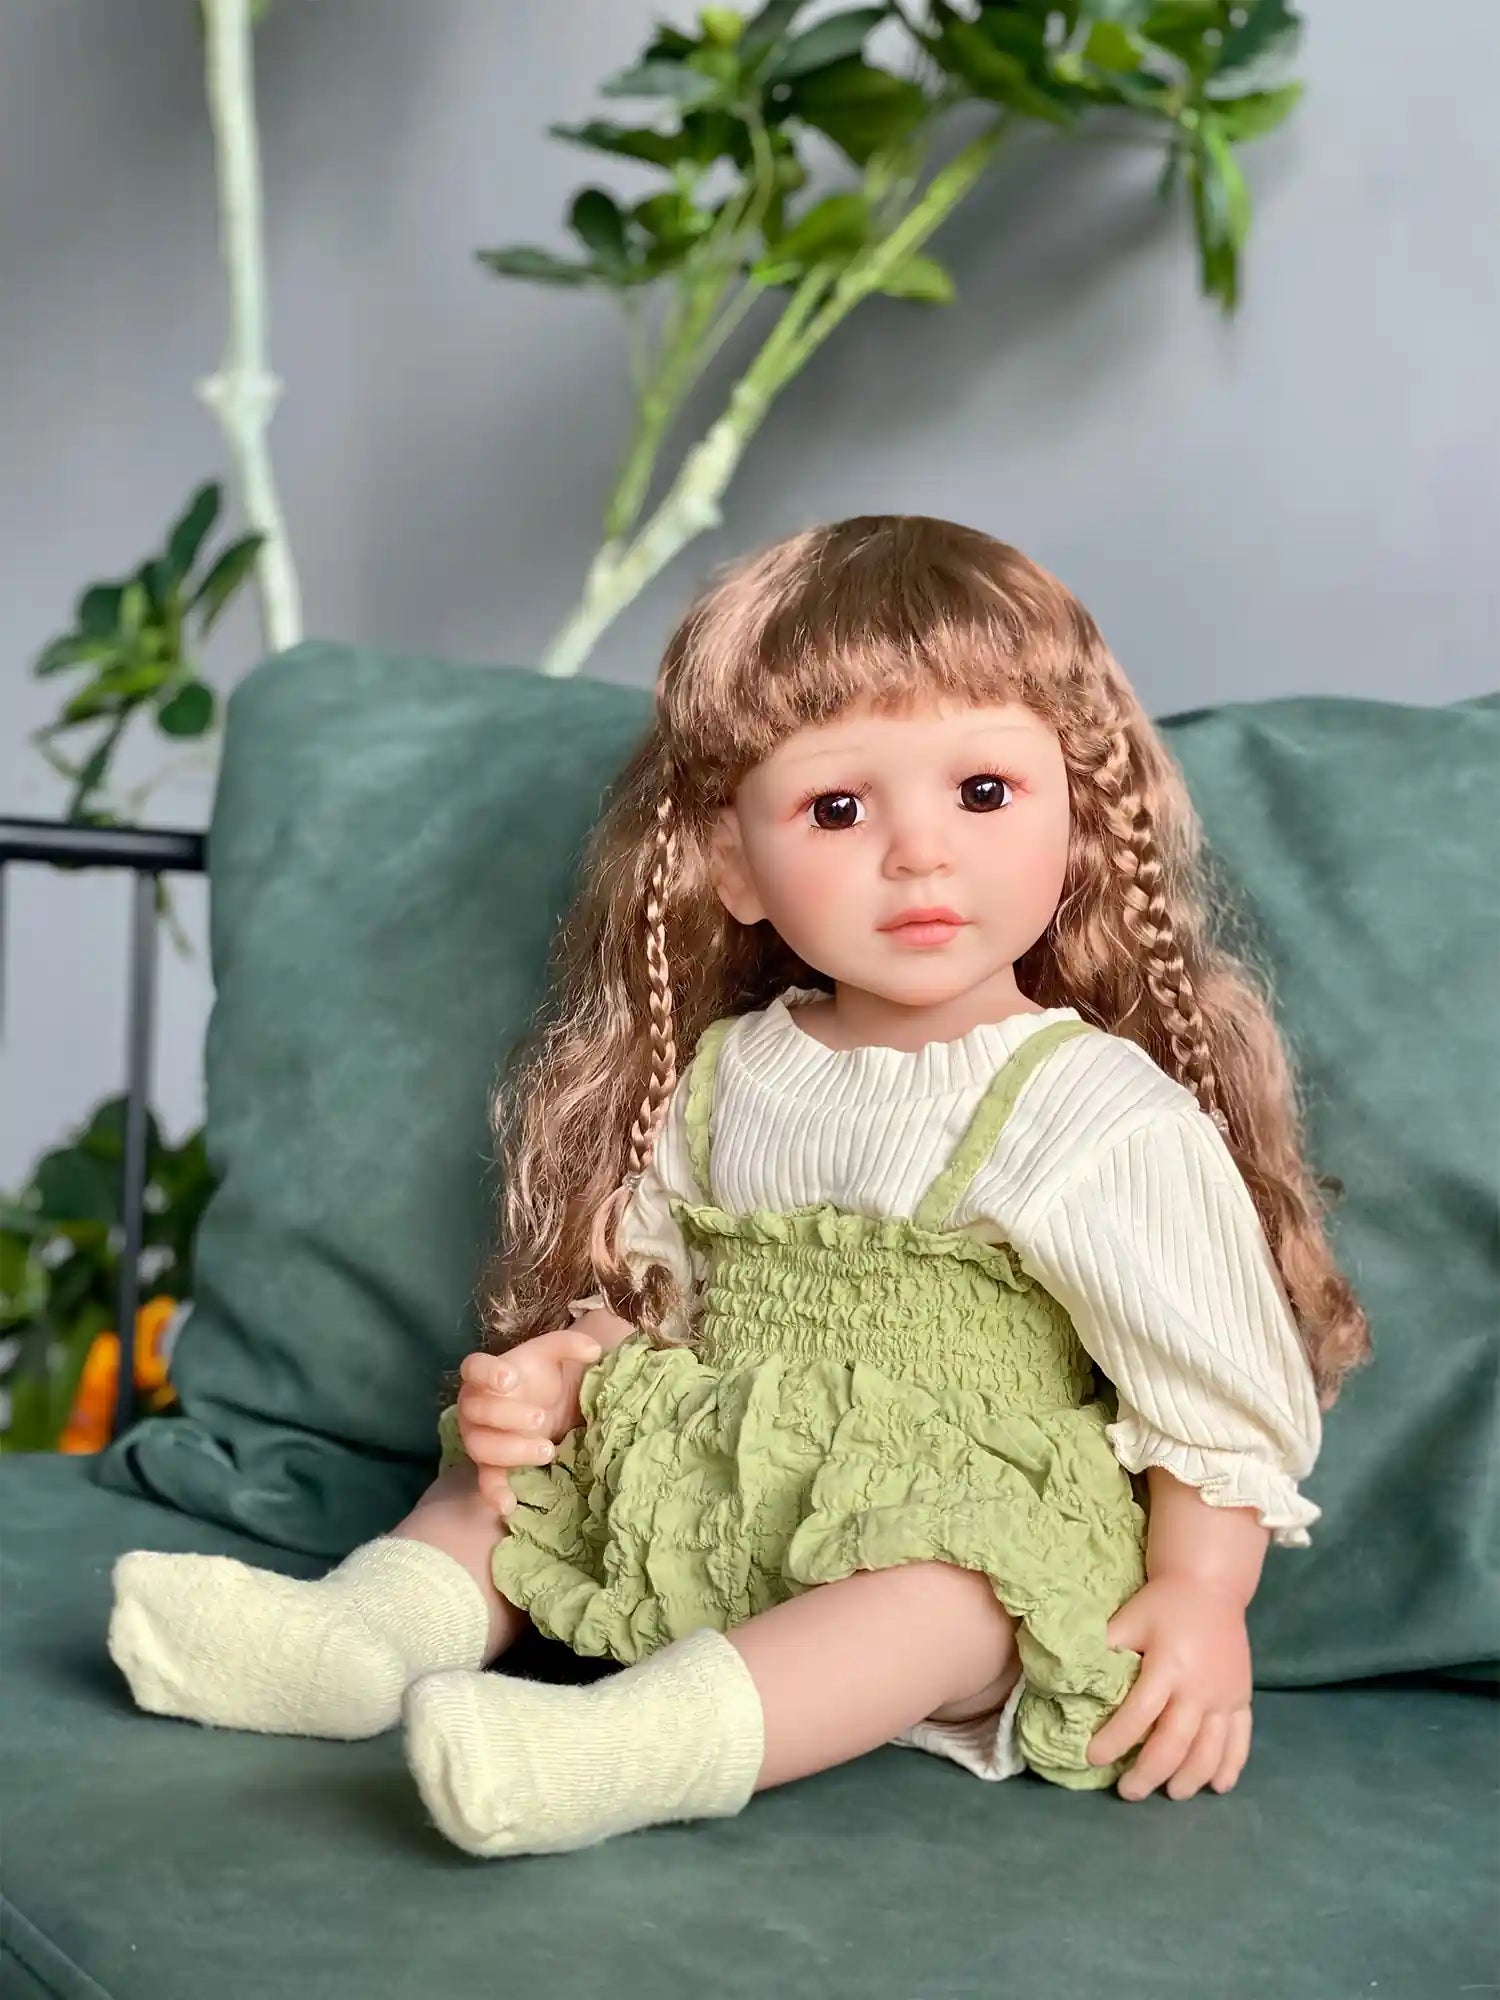 Lifelike doll with braids wearing a green jumper, posing with plants.